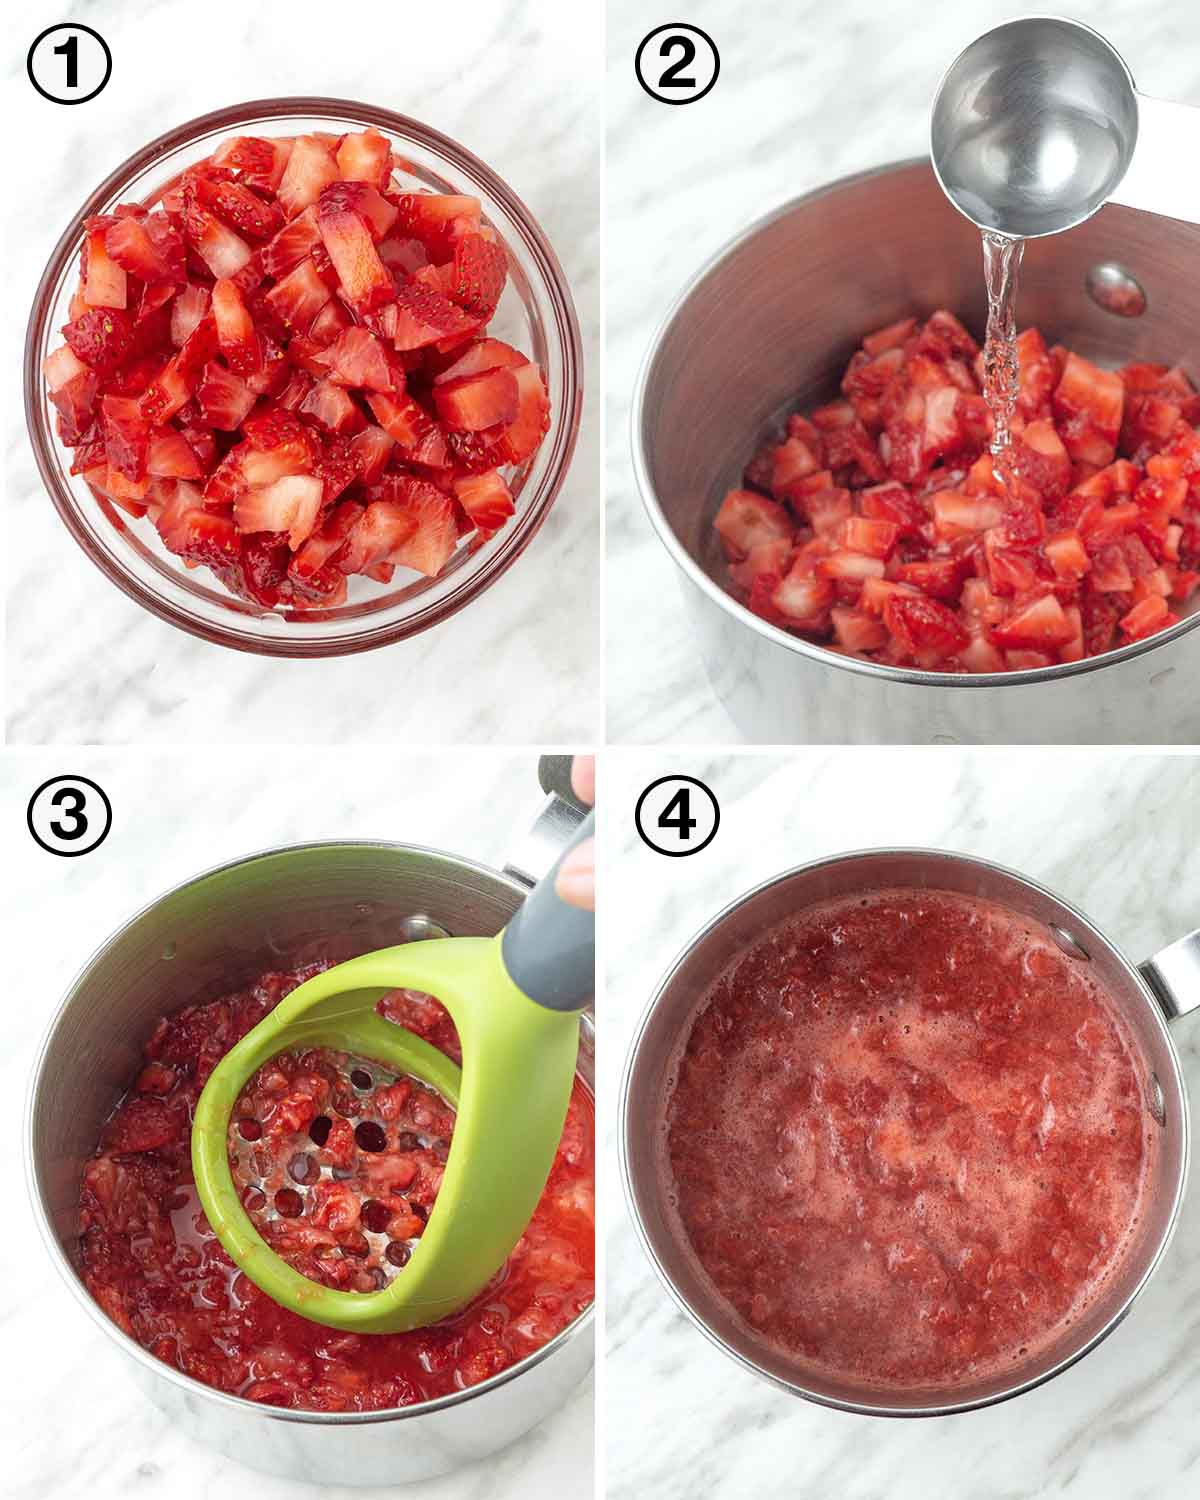 A collage of four images showing the first sequence of steps needed to make vegan strawberry frosting with fresh berries.